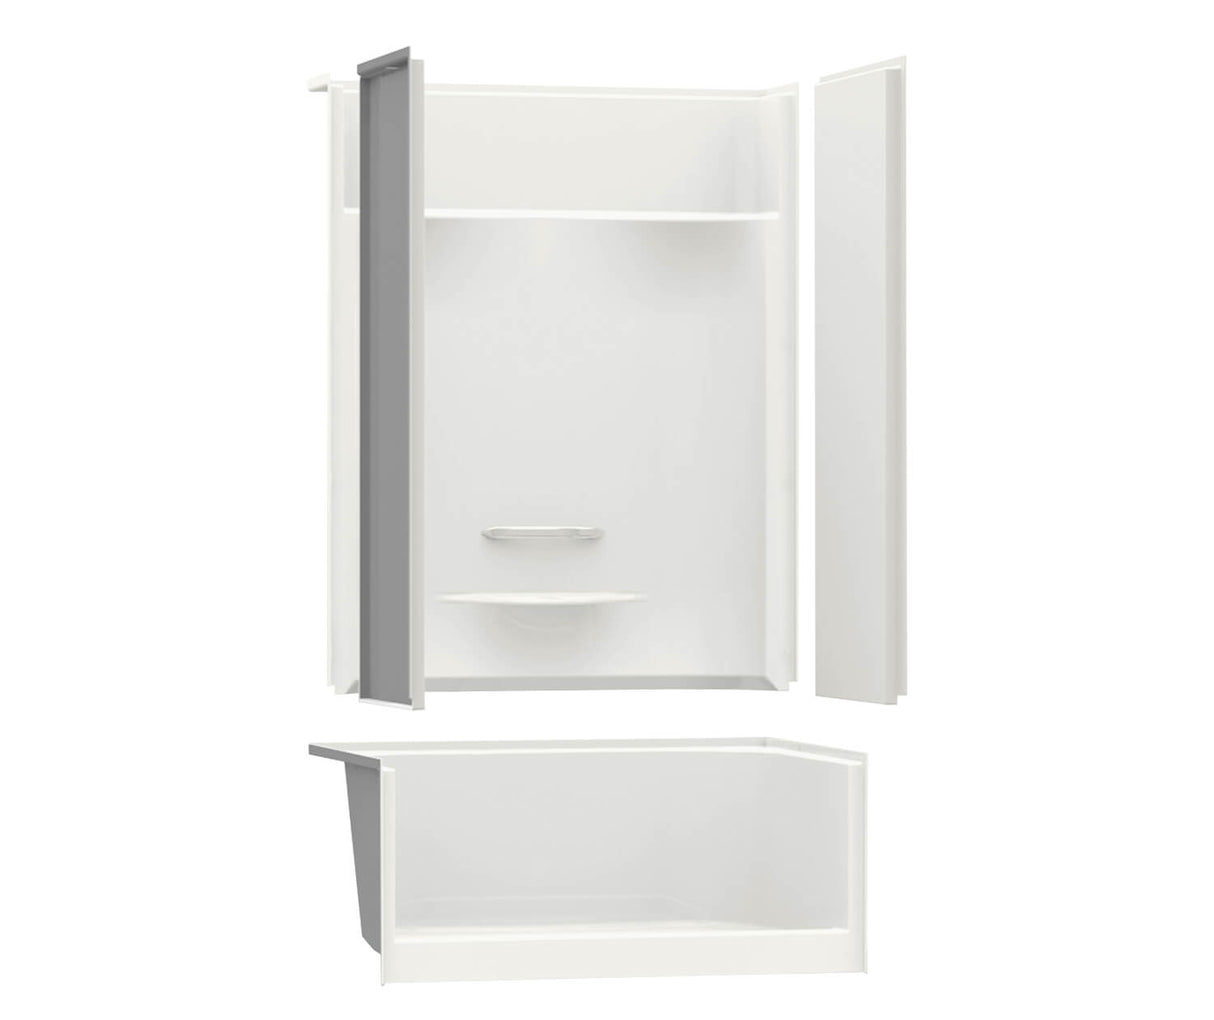 Aker KDS 3448 AcrylX Alcove Center Drain Four-Piece Shower in White